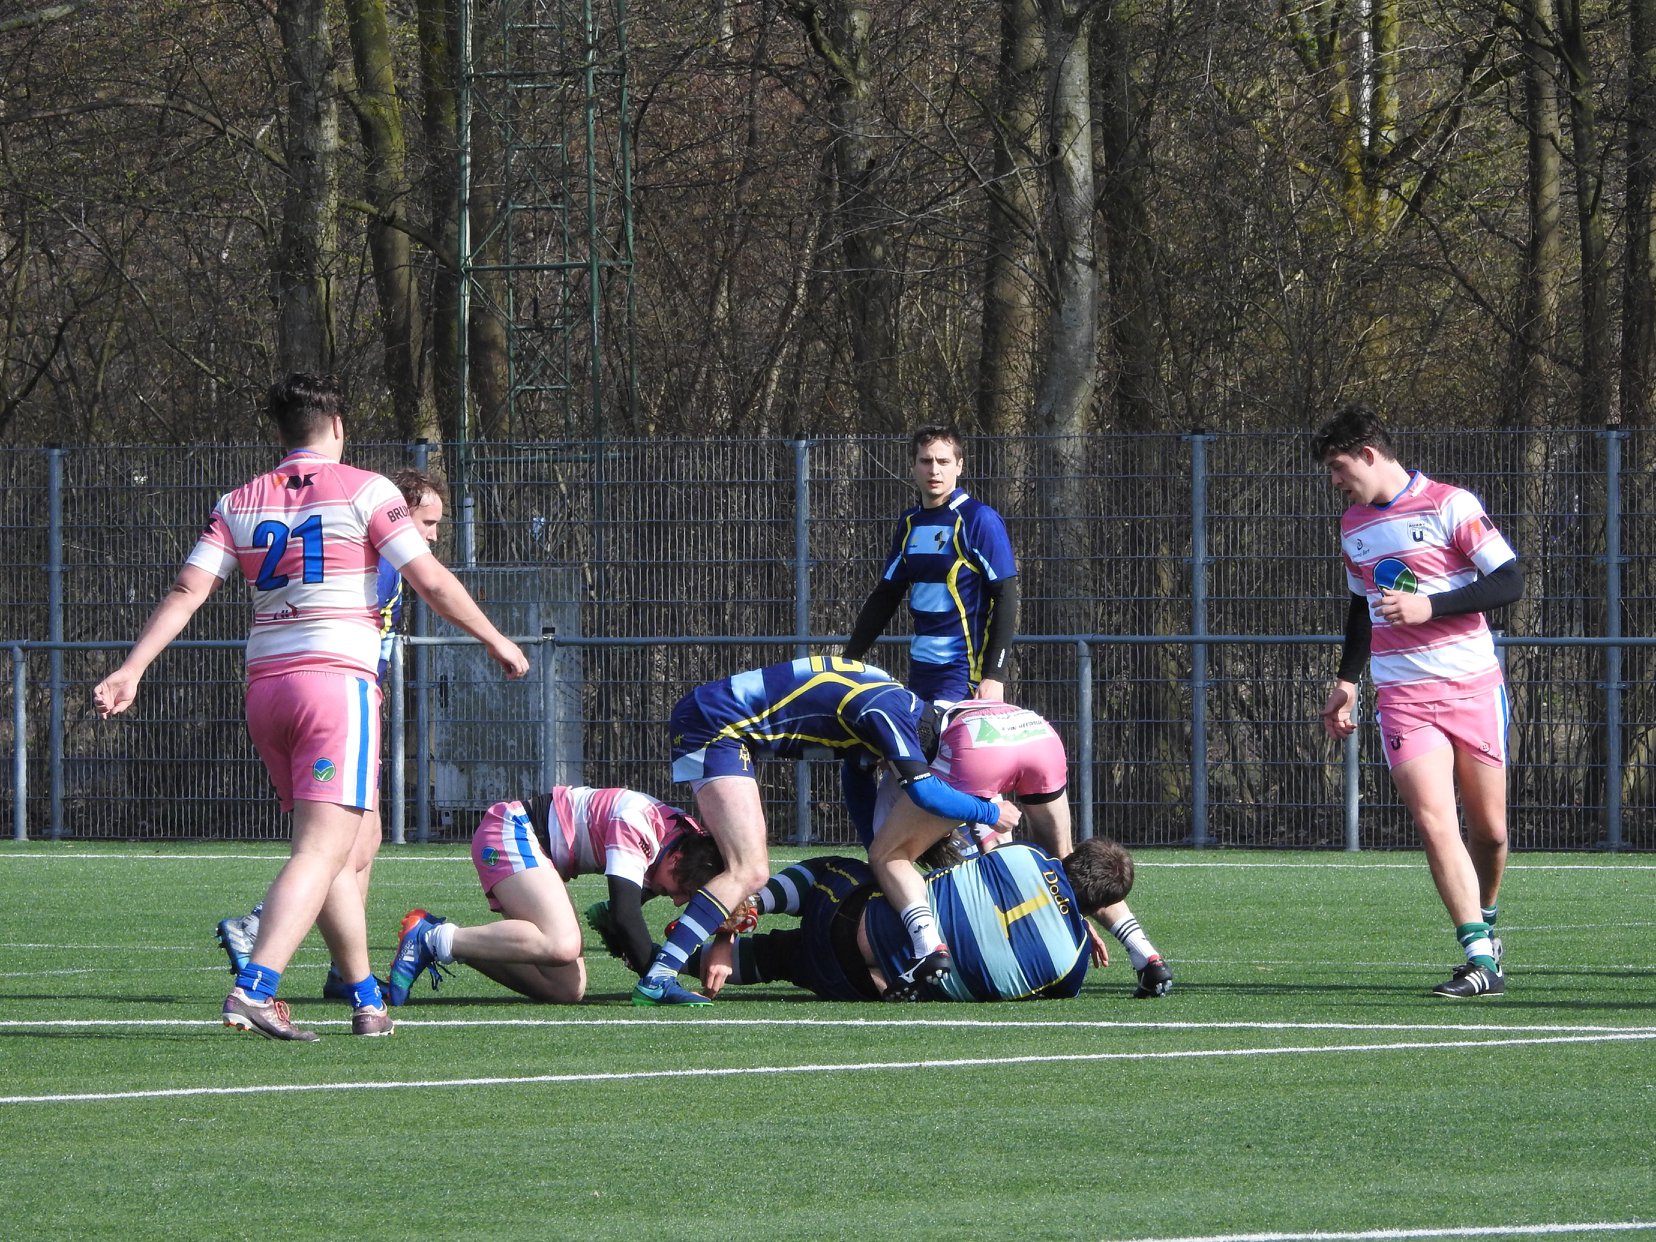 ghent-easter-rugby-1.jpg